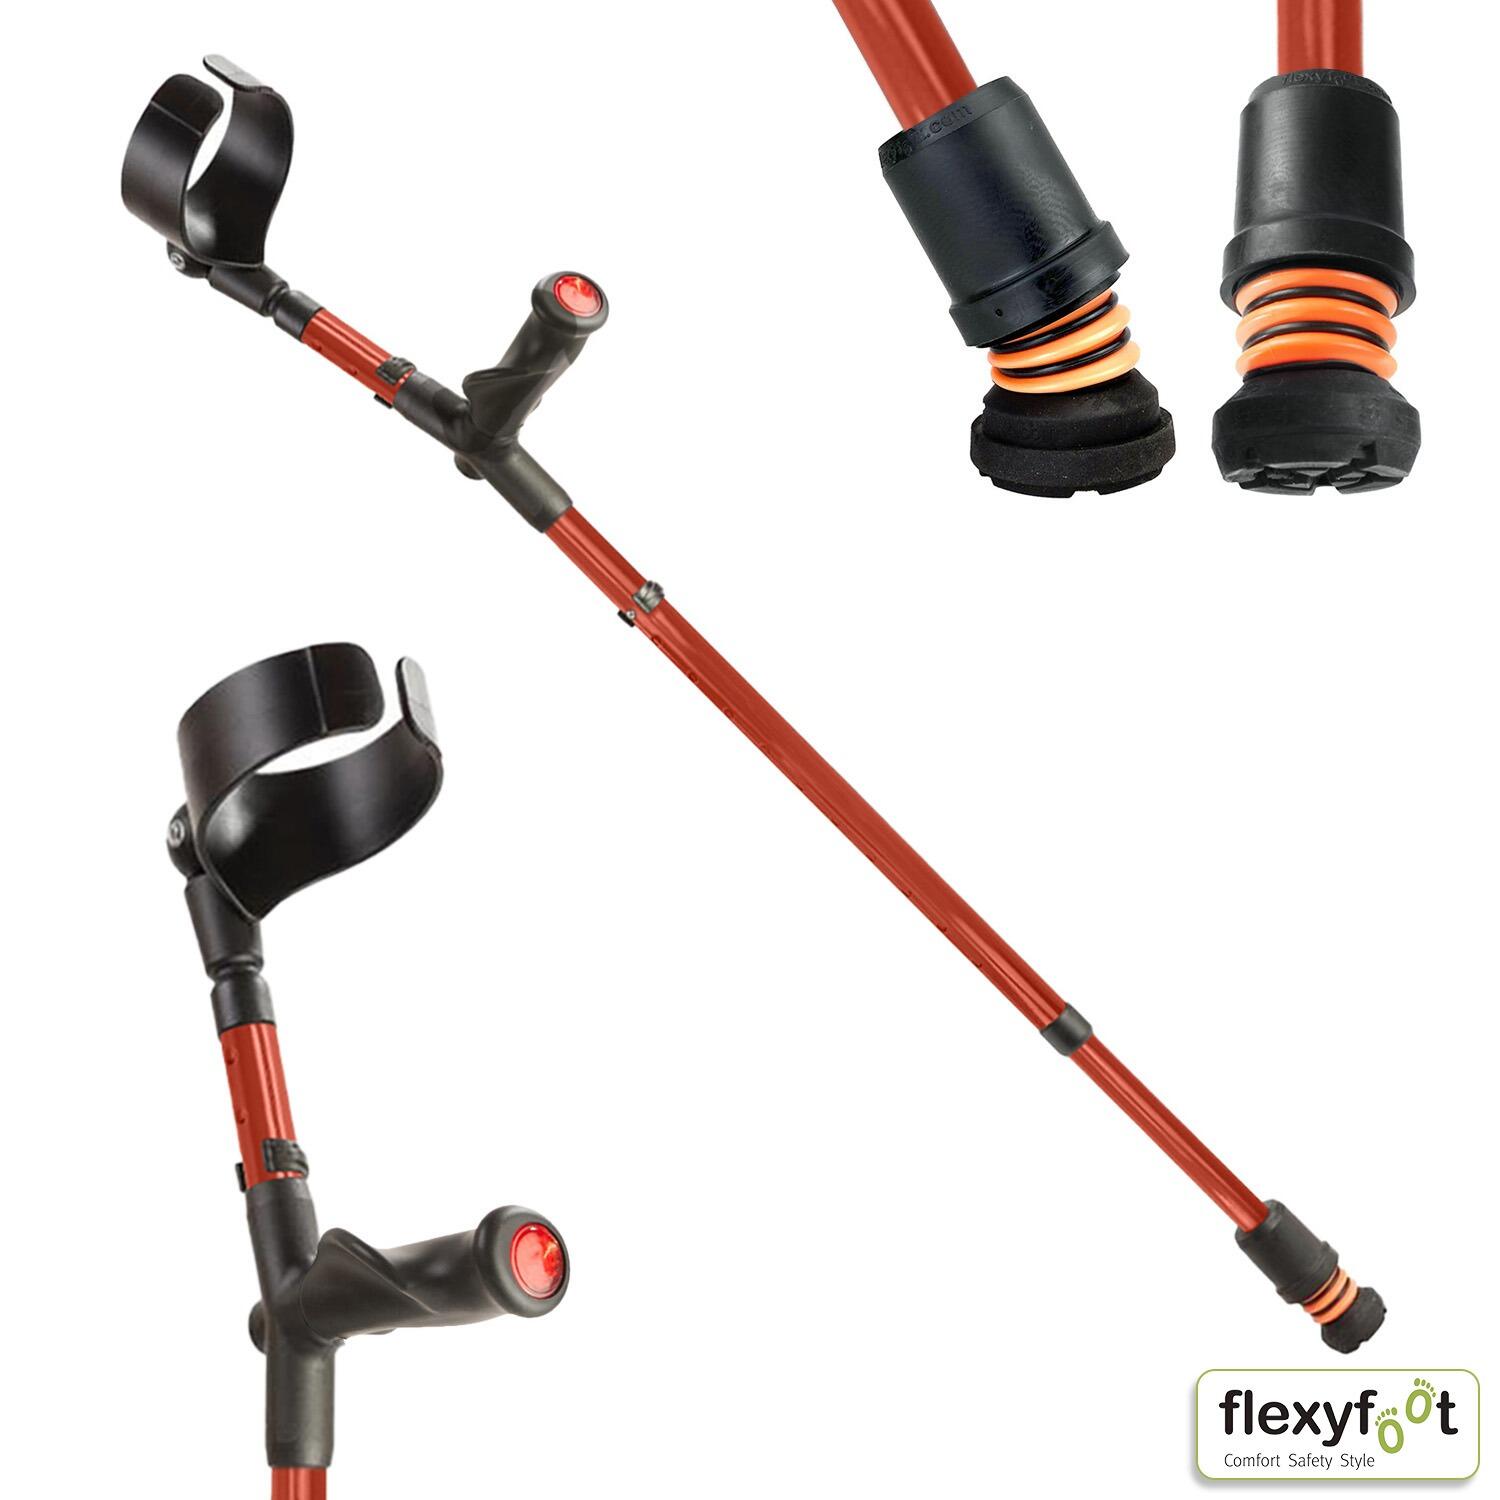 Flexyfoot Comfort Grip Double Adjustable Crutches - Red